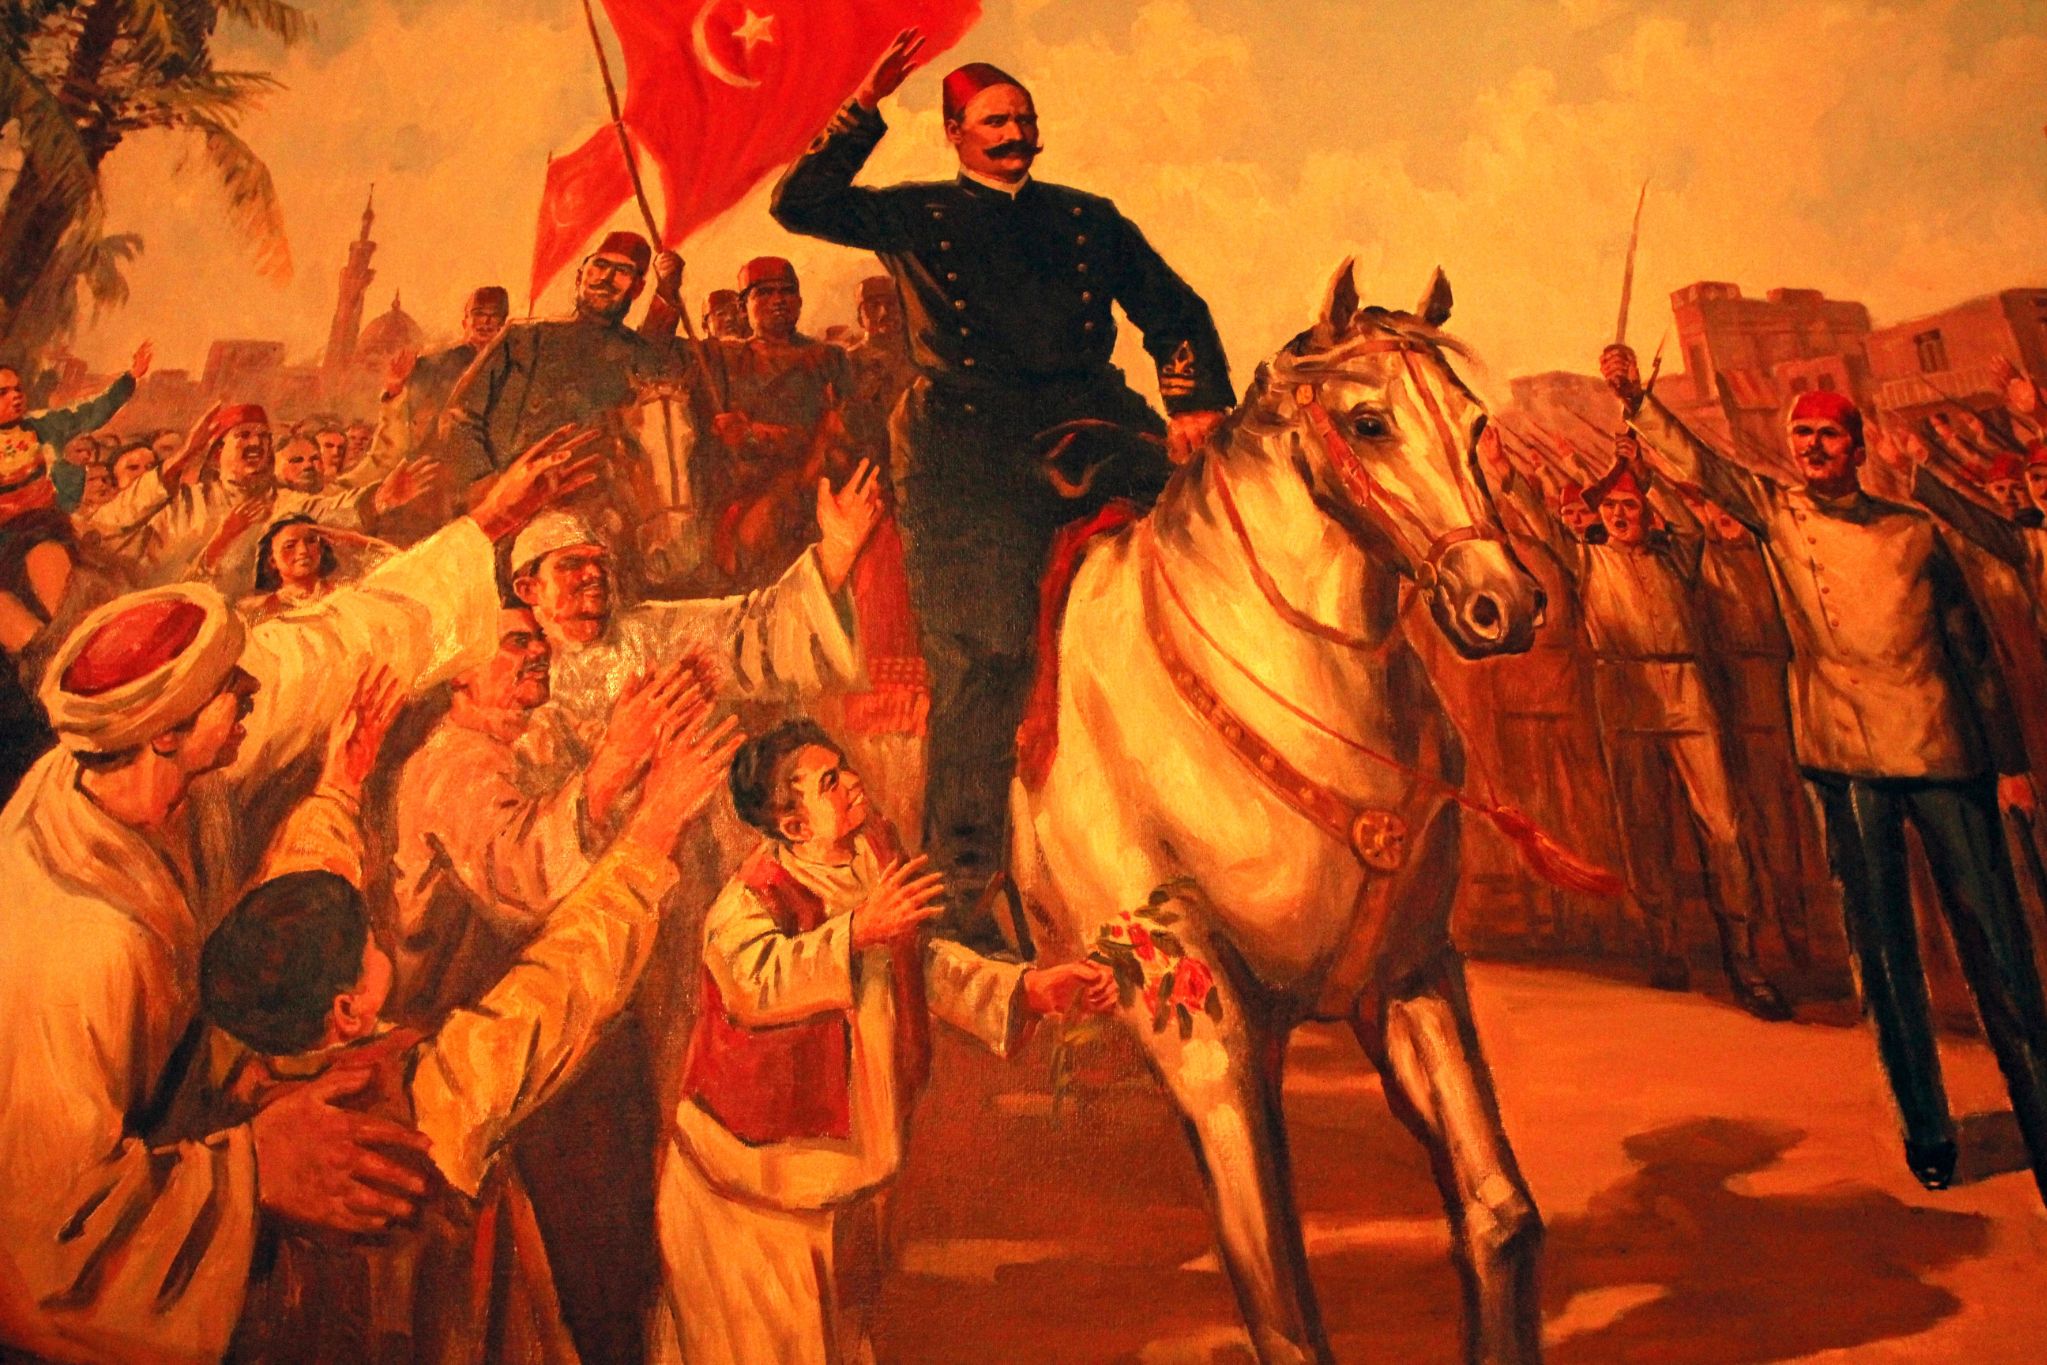 Painting of Ahmed Urabi, known as Urabi Pasha, showing the Protest against Khedive (ruler) of Egypt (Alamy)